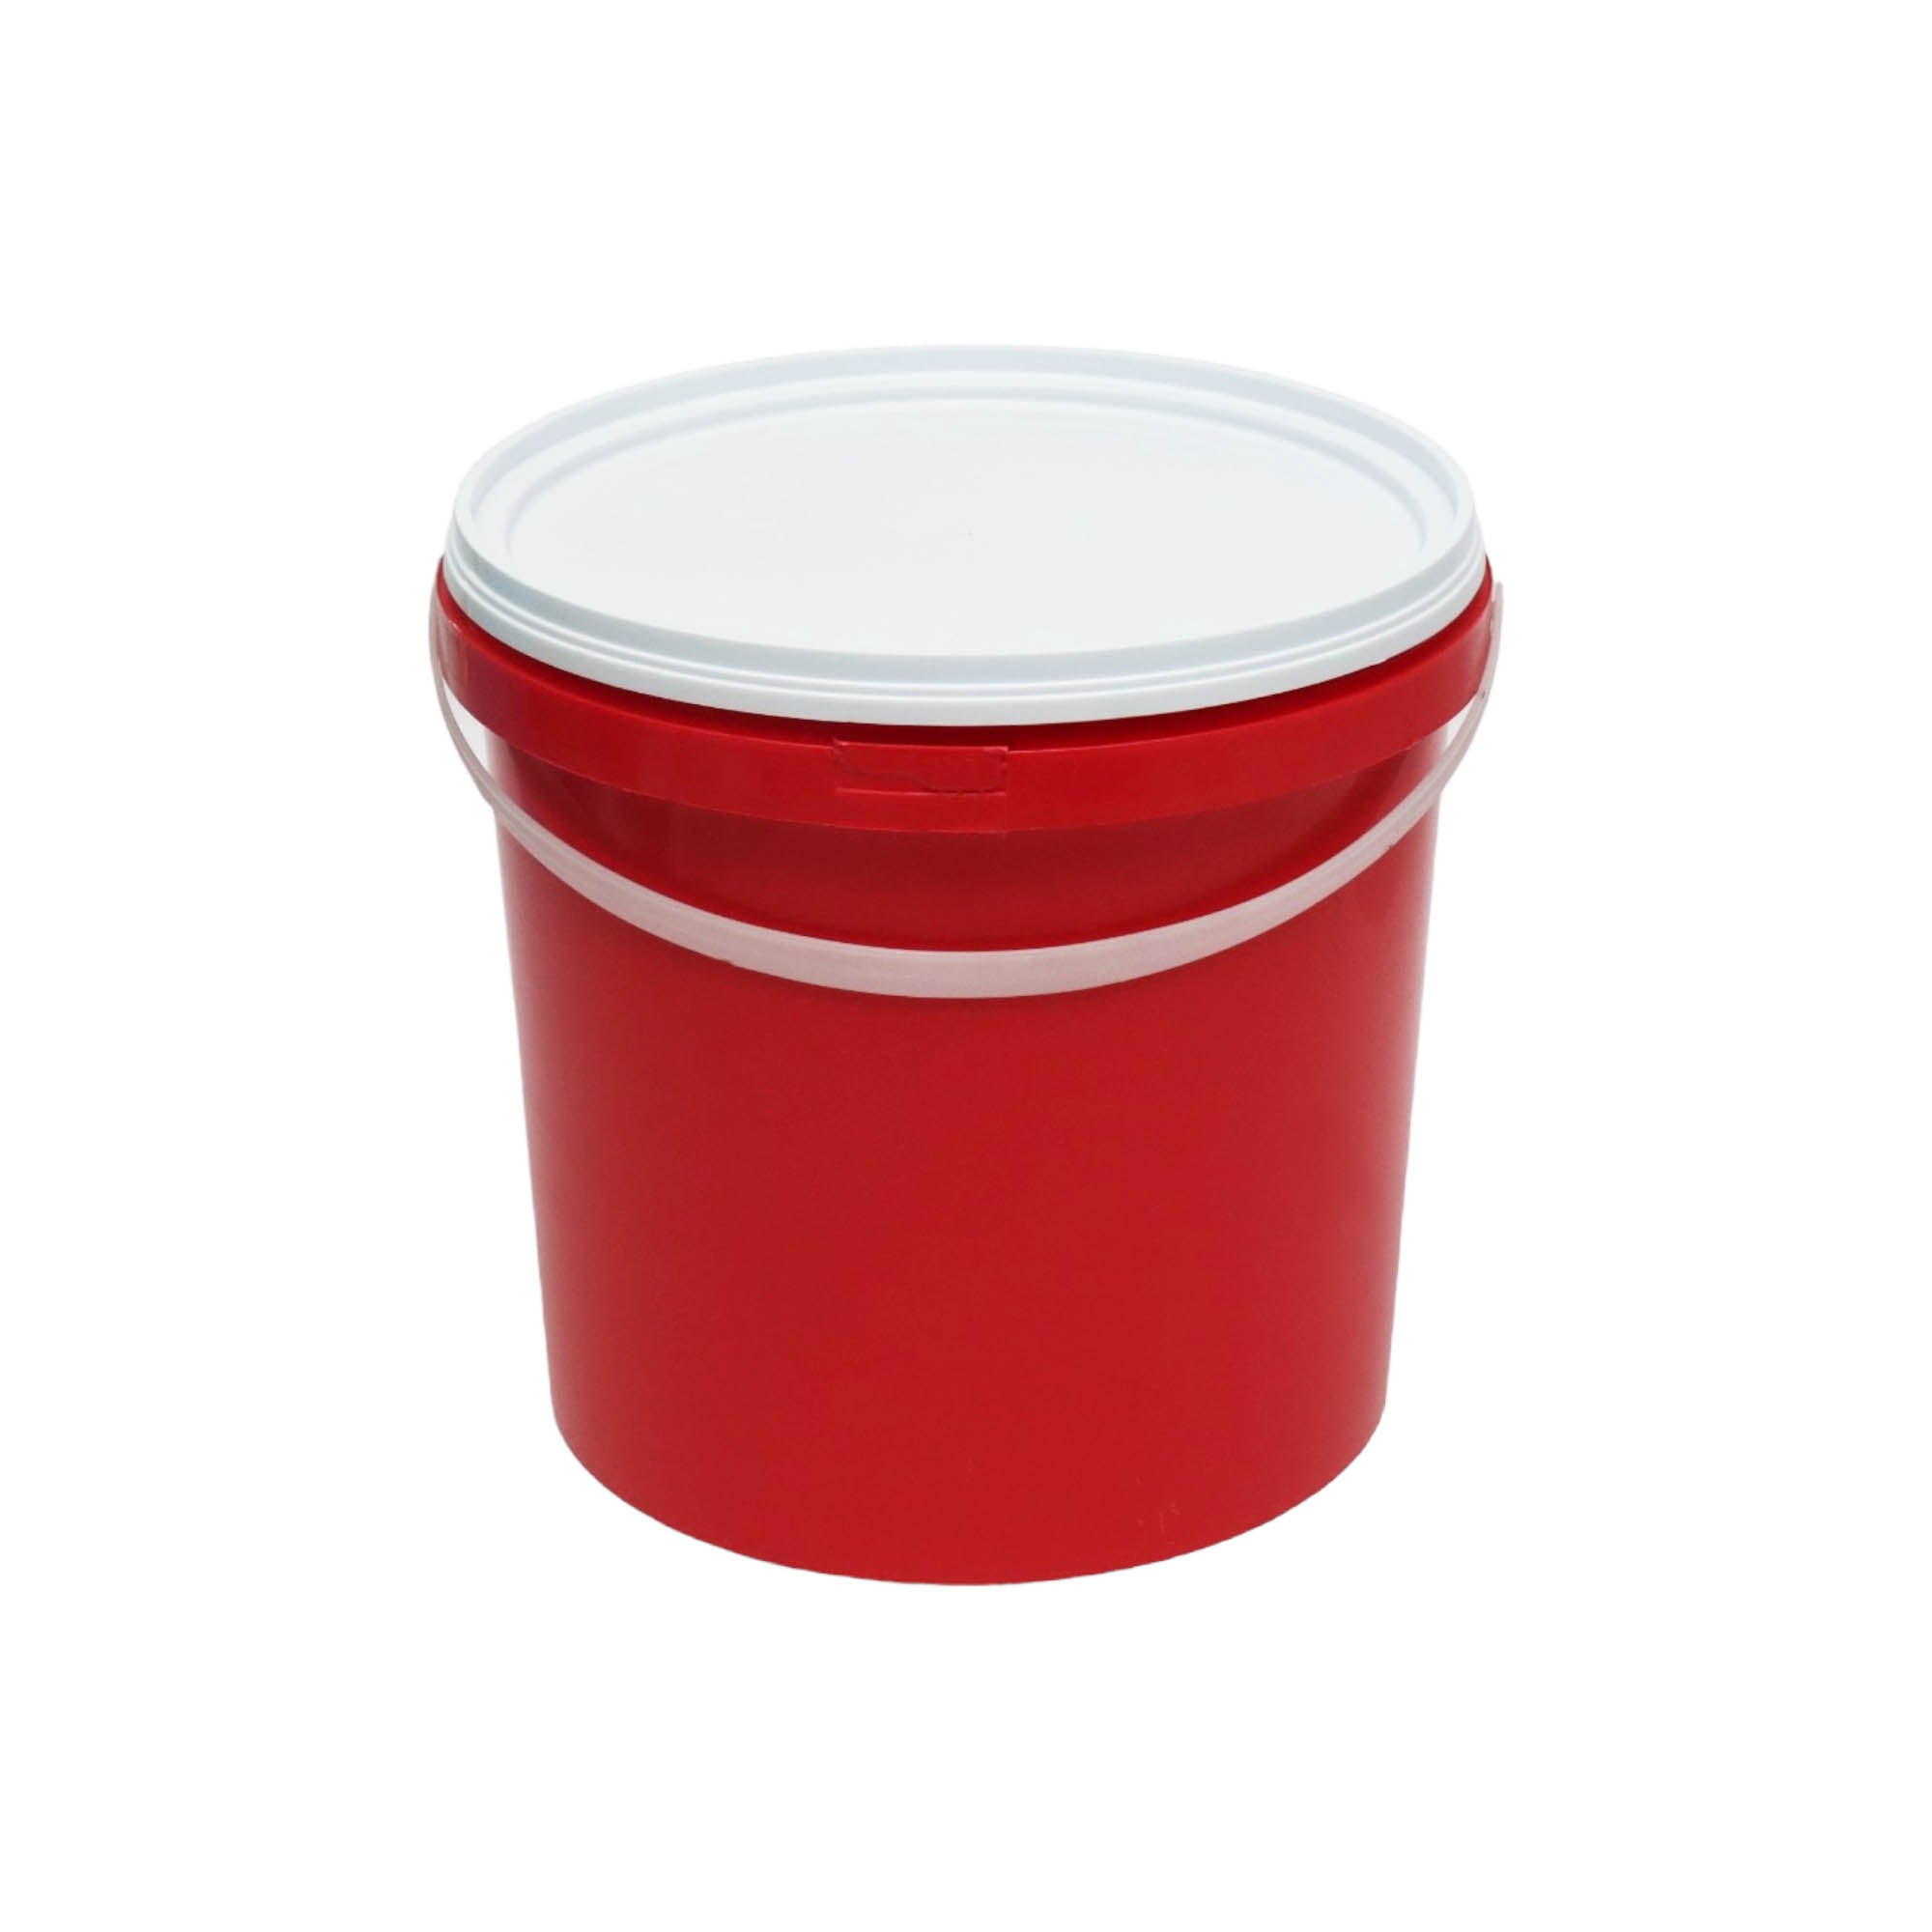 10L Plastic Bucket with White Lid